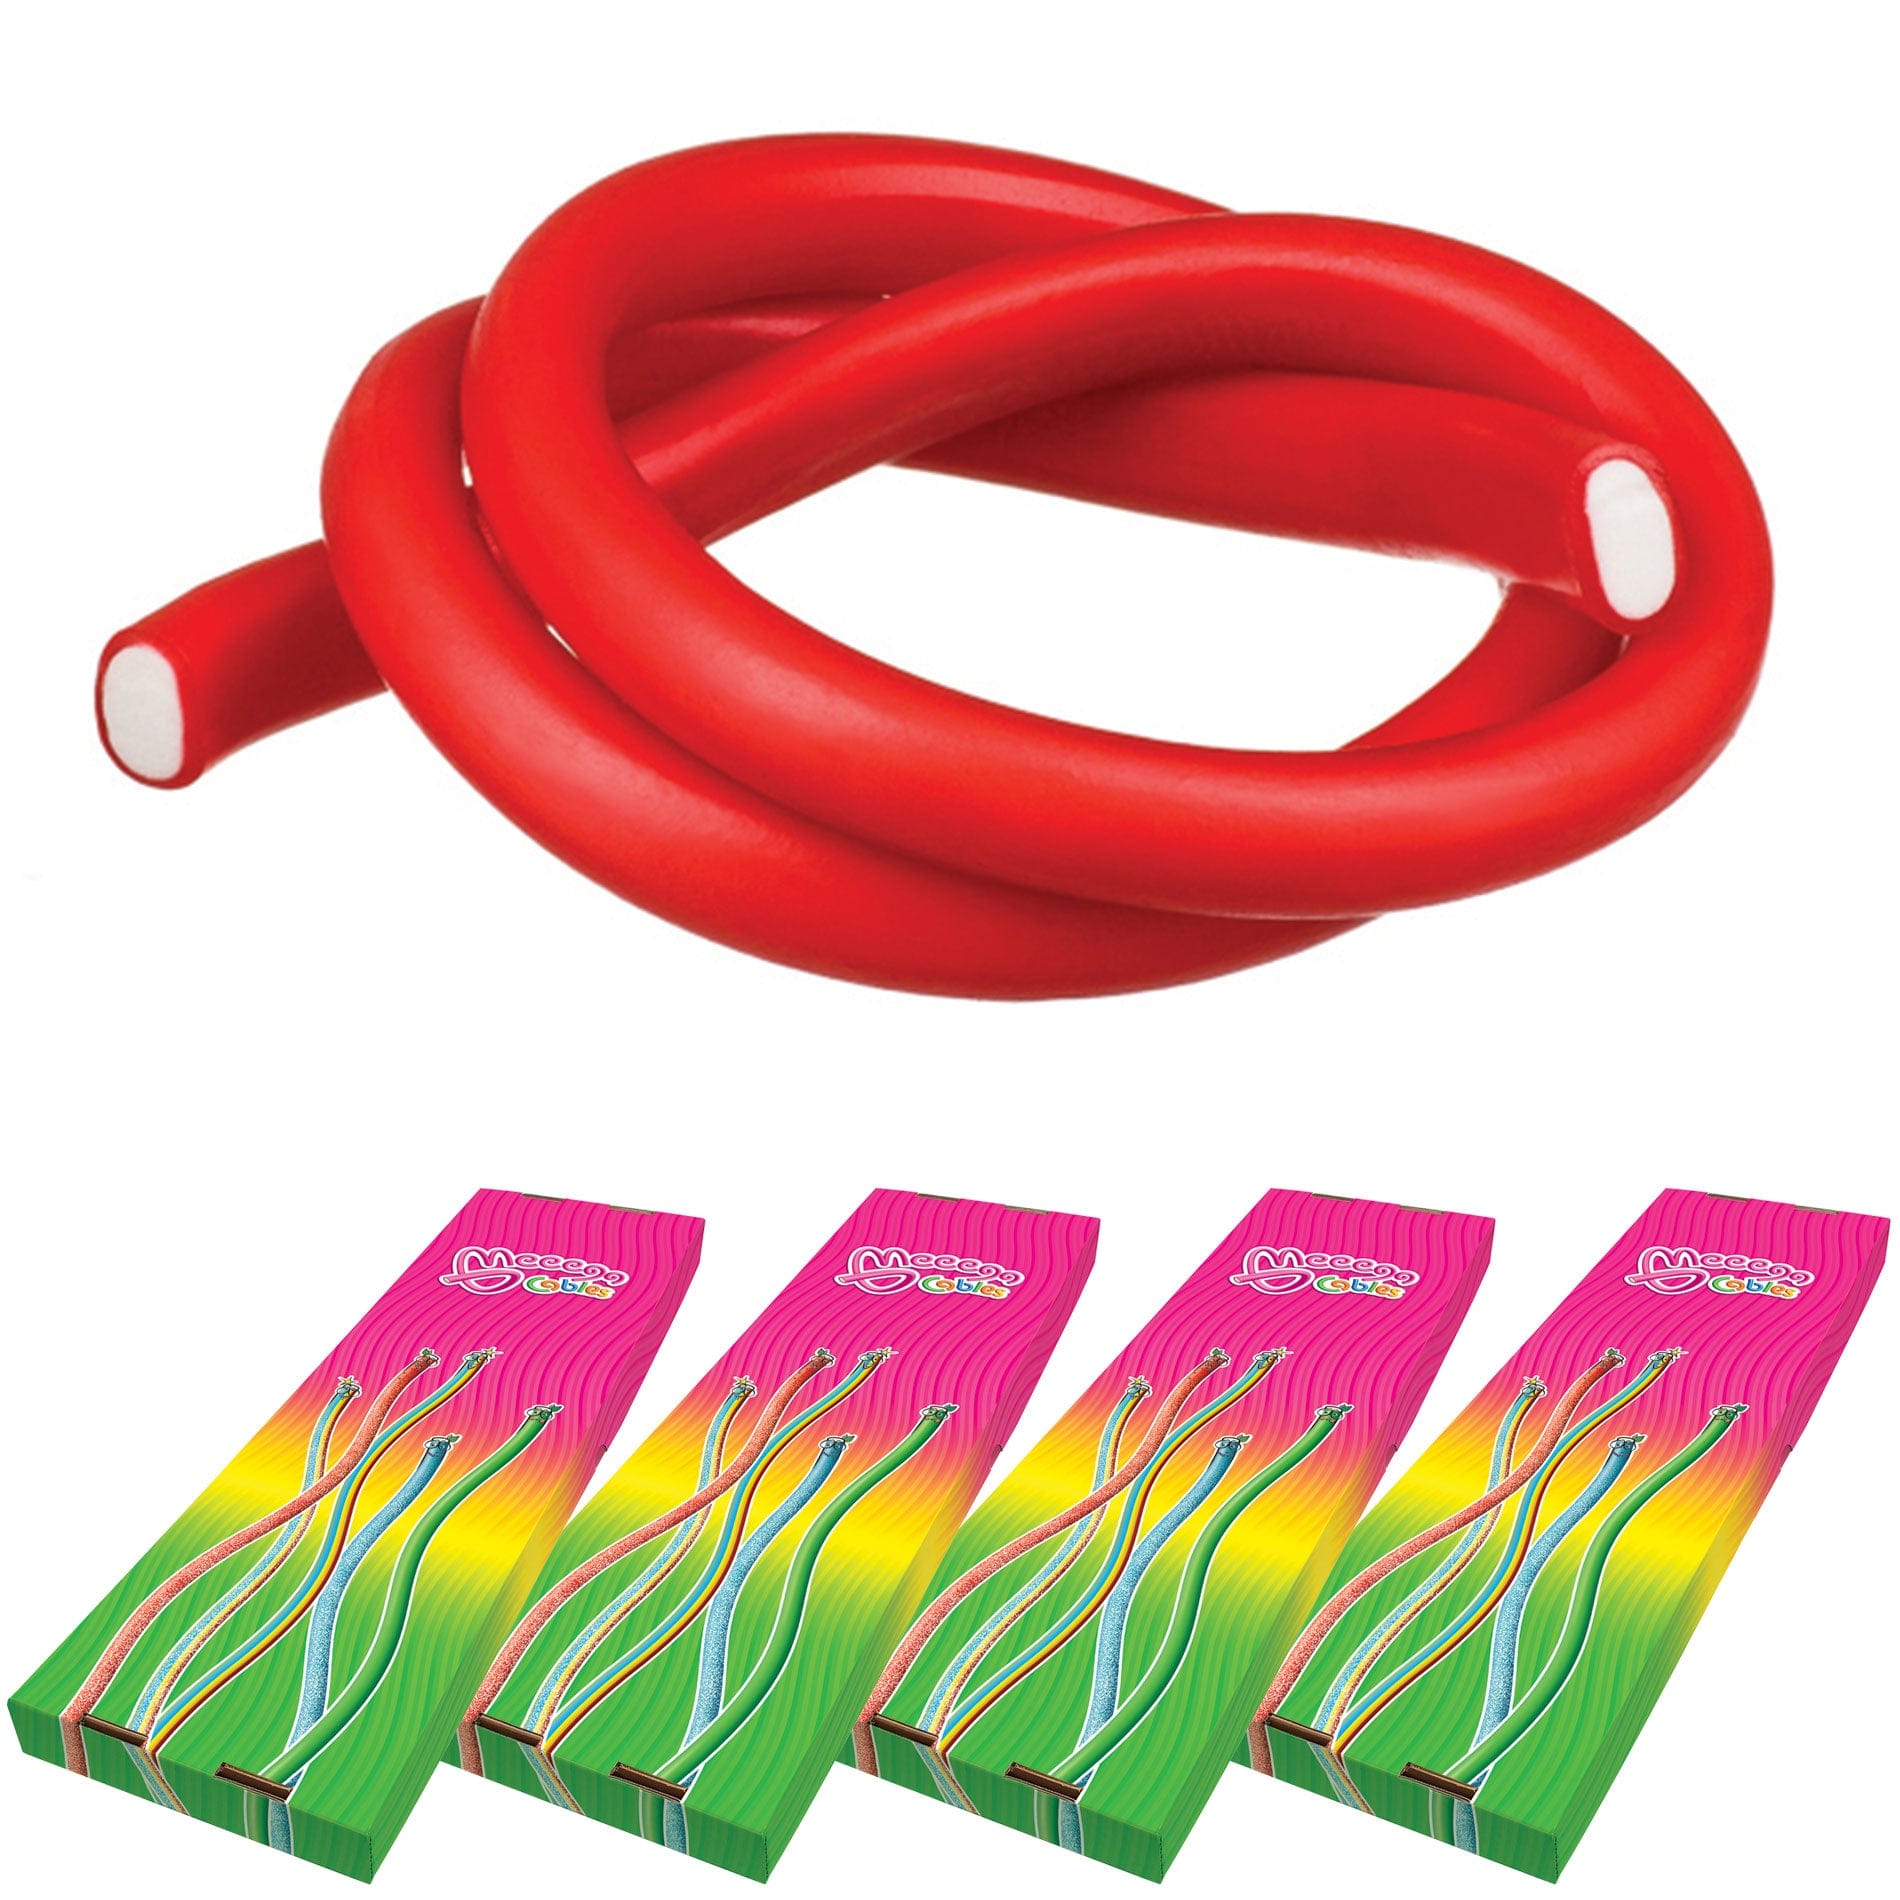 Novelty Concessions Gummy Rope STRAWBERRY / 4 Pack (120 pieces) Meeega Cables European Chewy Rope Candy - Box of 30 individually wrapped Meeega Cables, each over 2-feet long cups with lids and straws